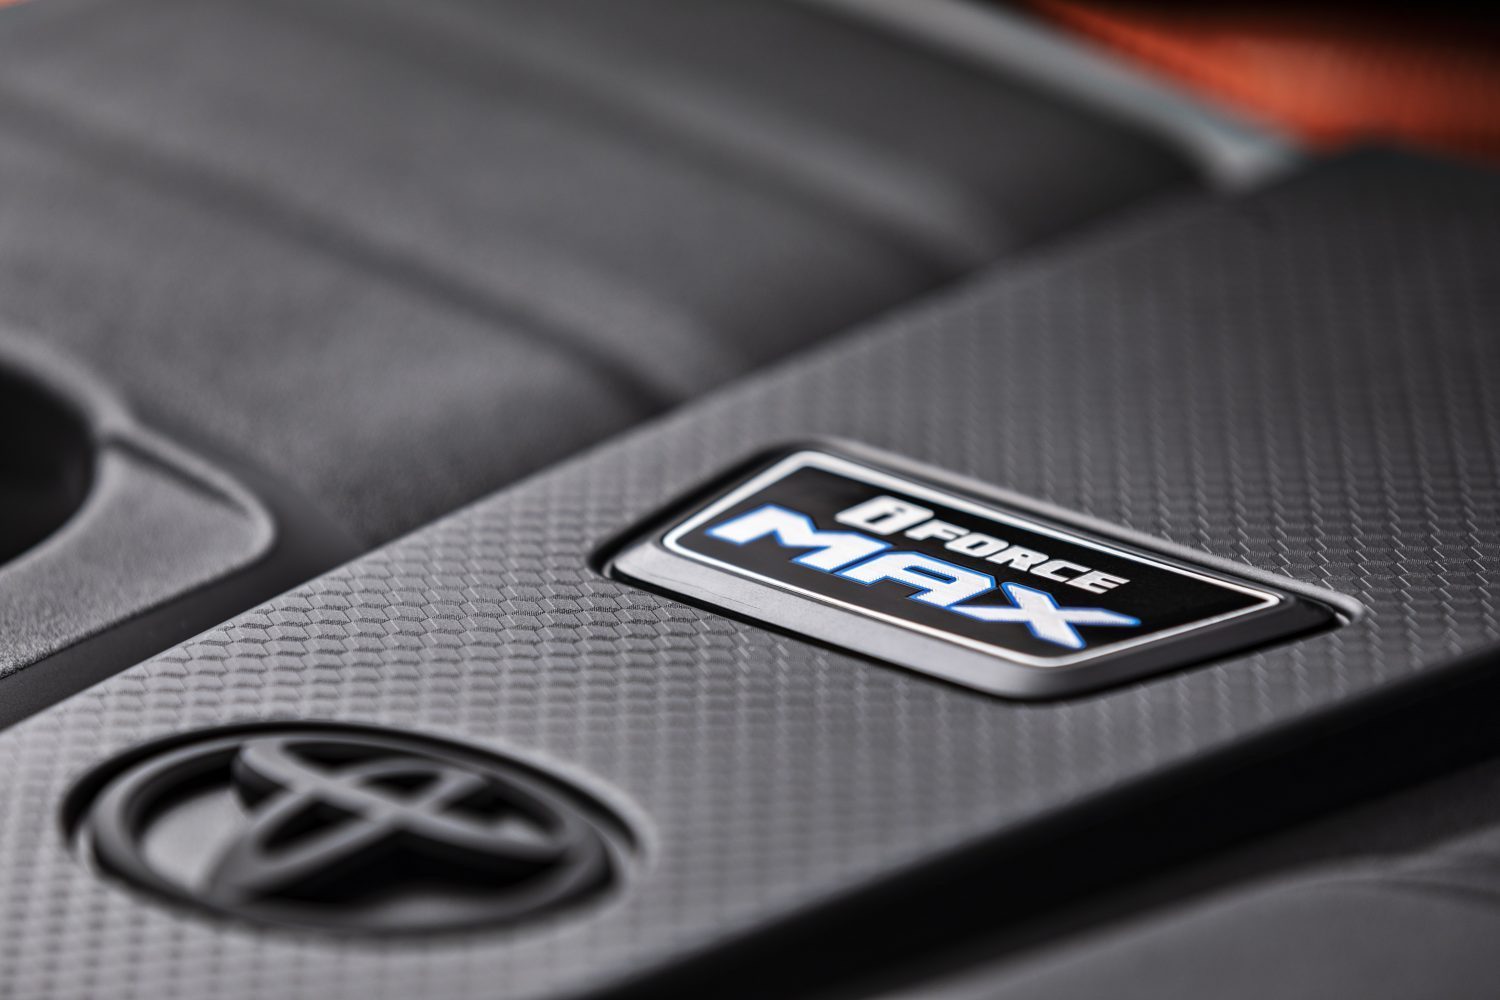 Detail photo of the engine cover of the Toyota Tundra i-FORCE MAX hybrid turbocharged V6 engine.